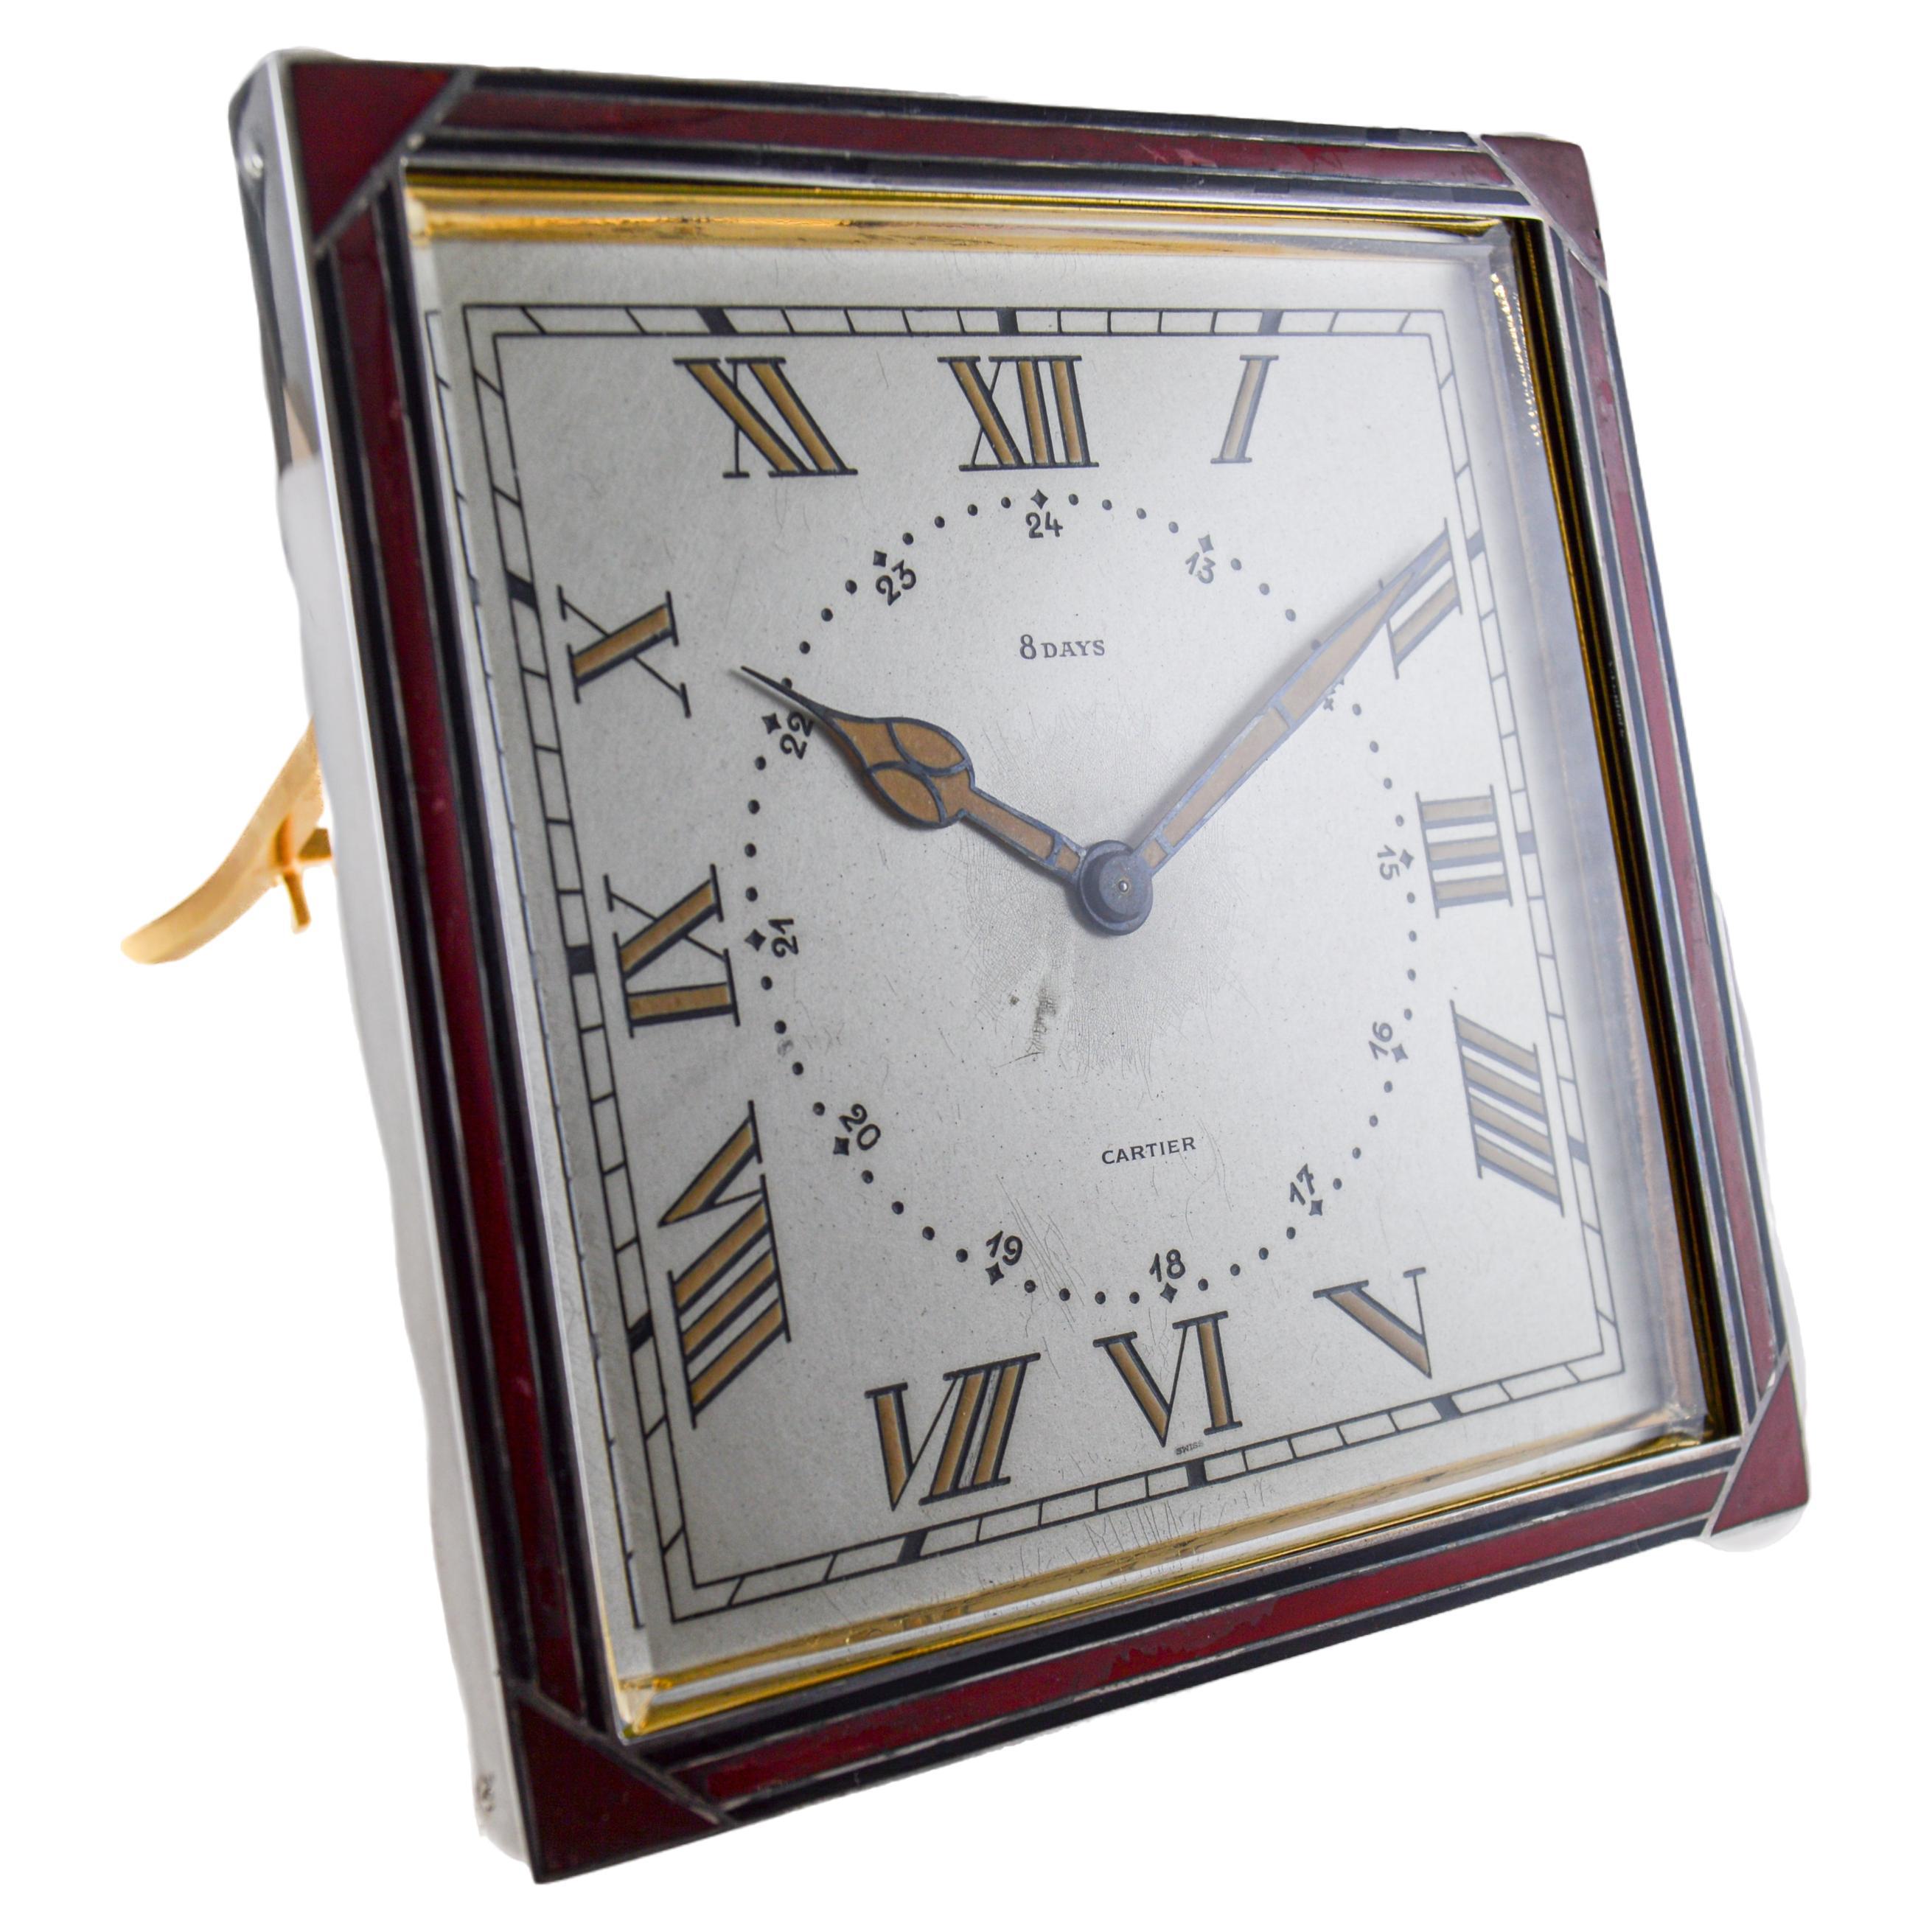 Cartier Sterling and Enamel Art Deco Desk Clock with Breguet Engine Turned Dial In Excellent Condition For Sale In Long Beach, CA